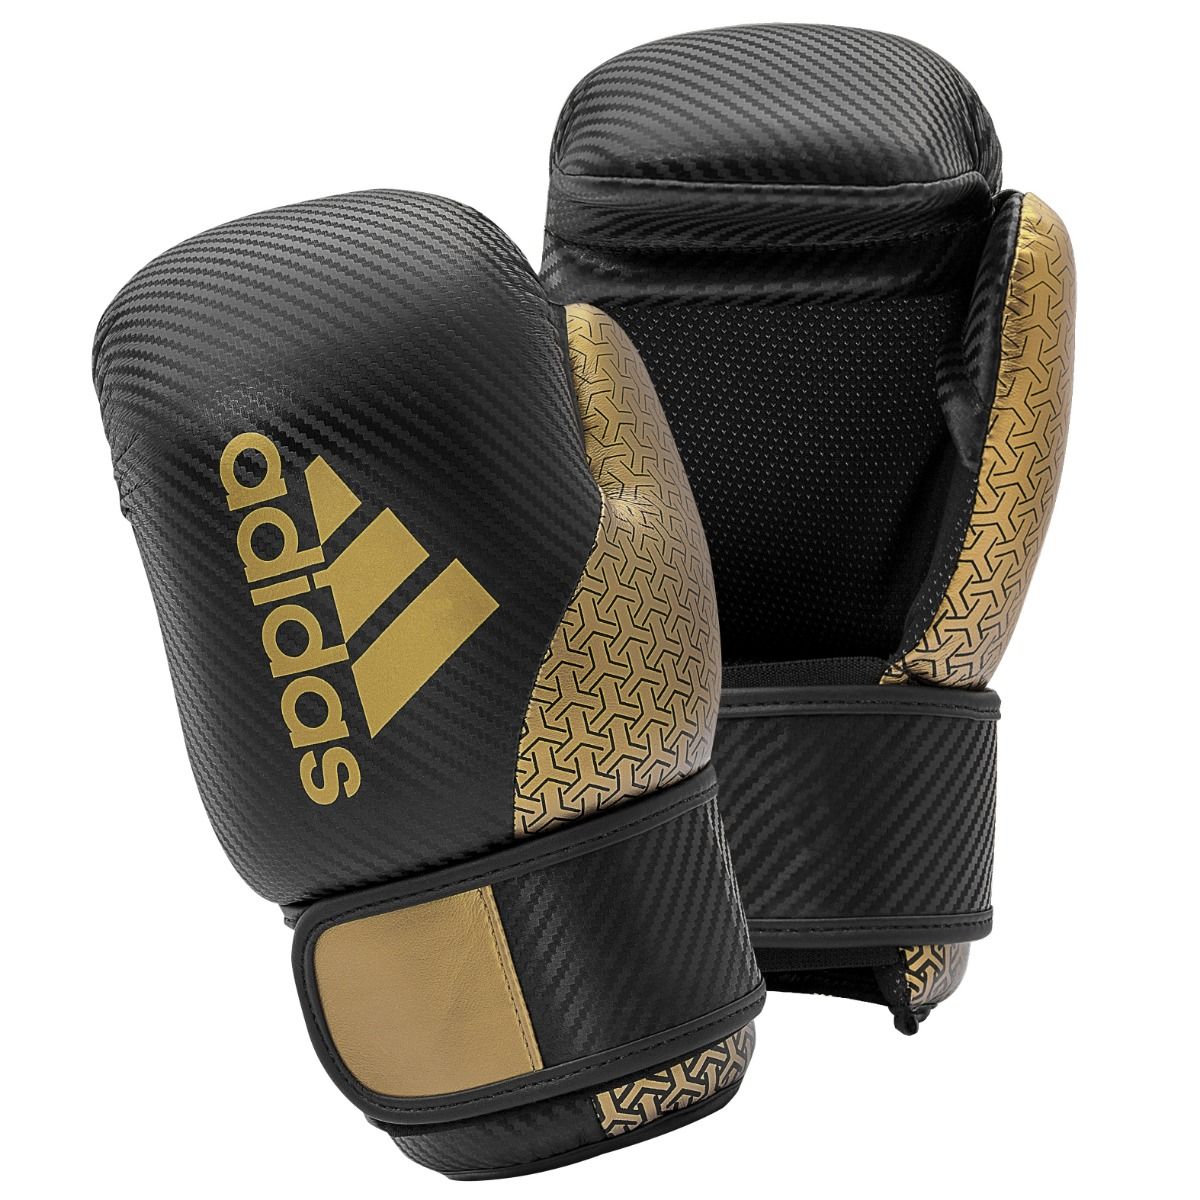 Adidas Pro Semi Contact Sparring Gloves - Black - Click Image to Close